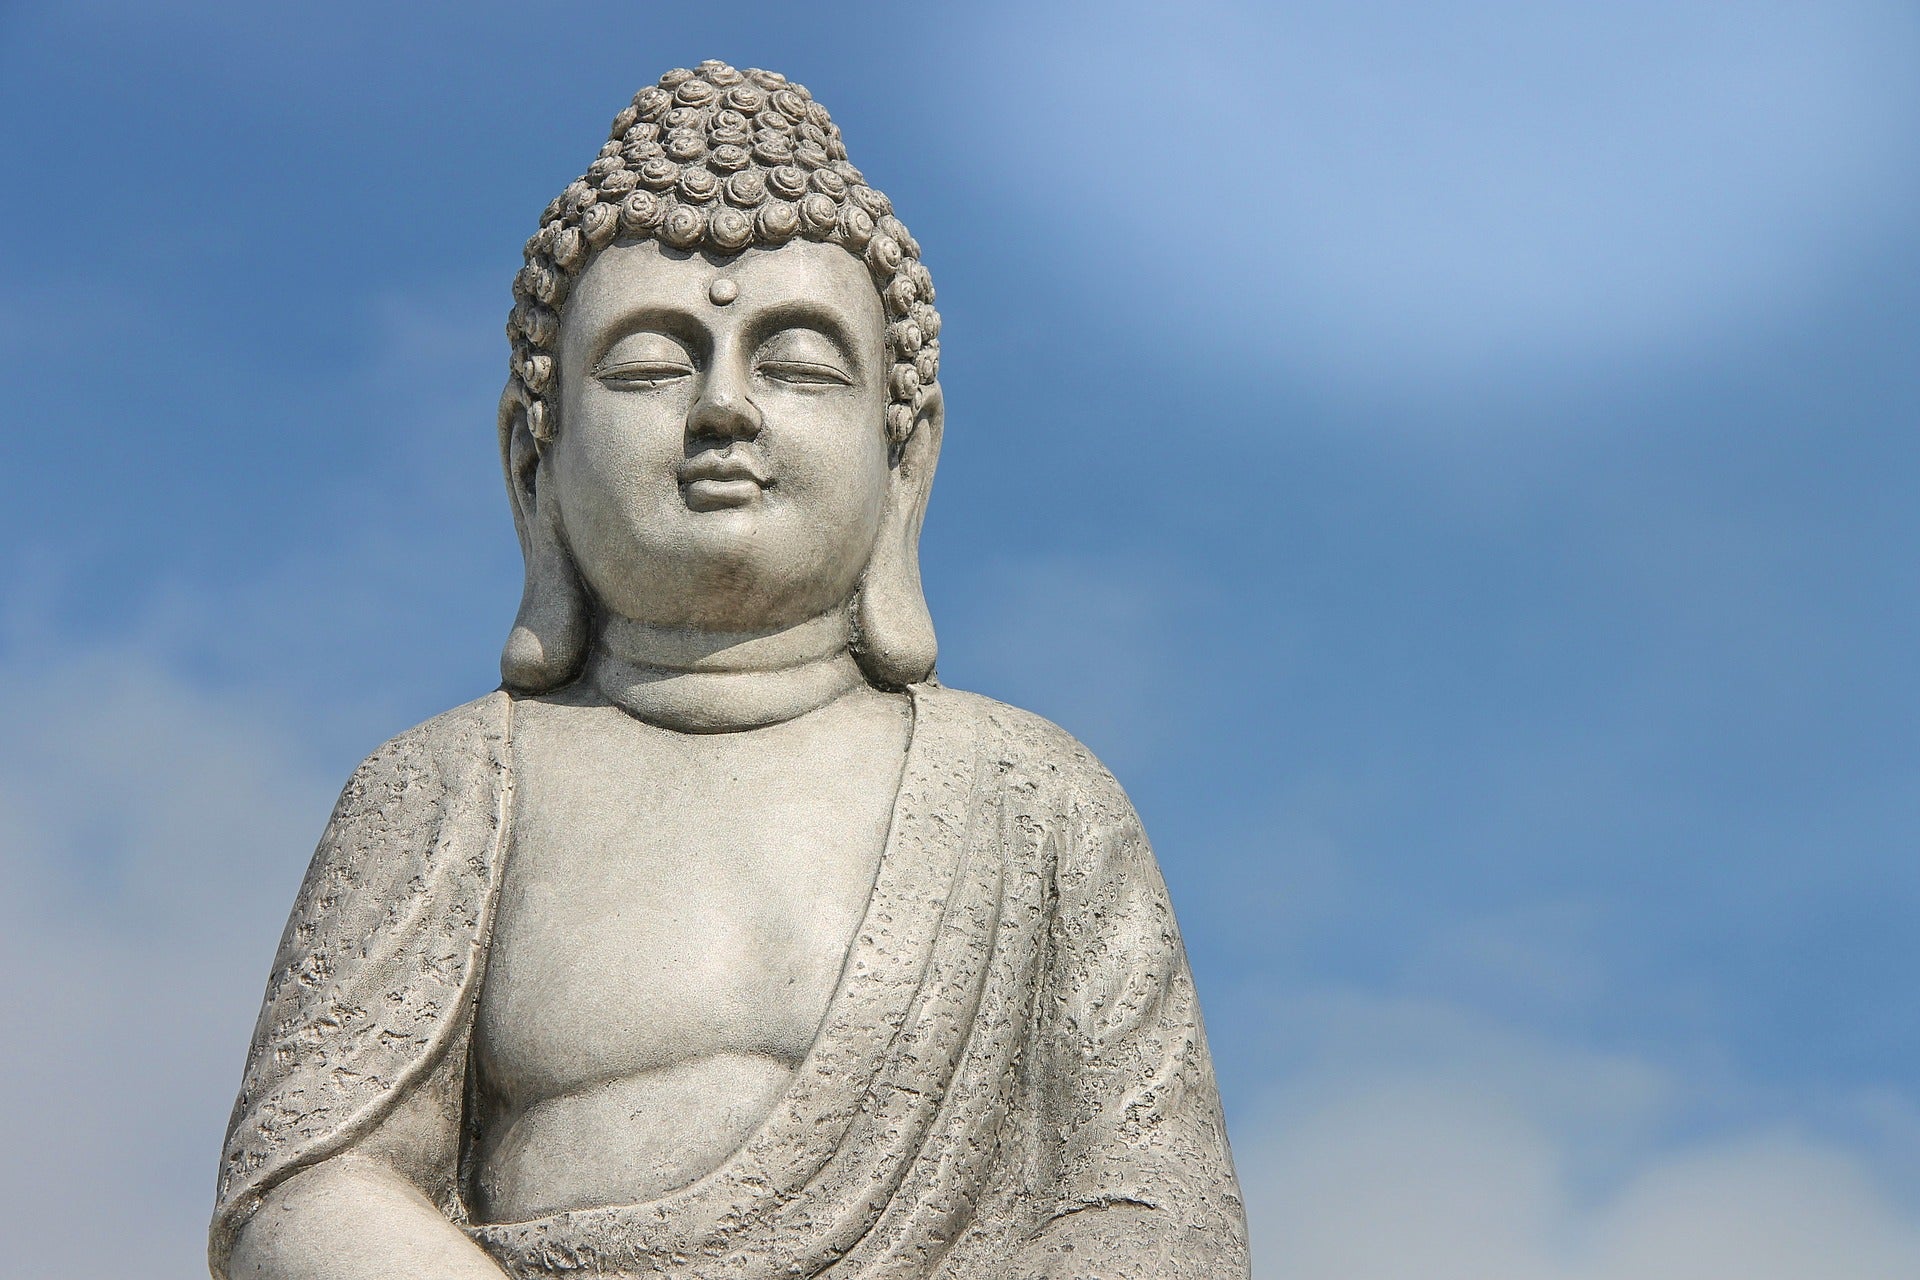 Buddha Poses And Postures: The Meaning of Buddha Statues - YouTube